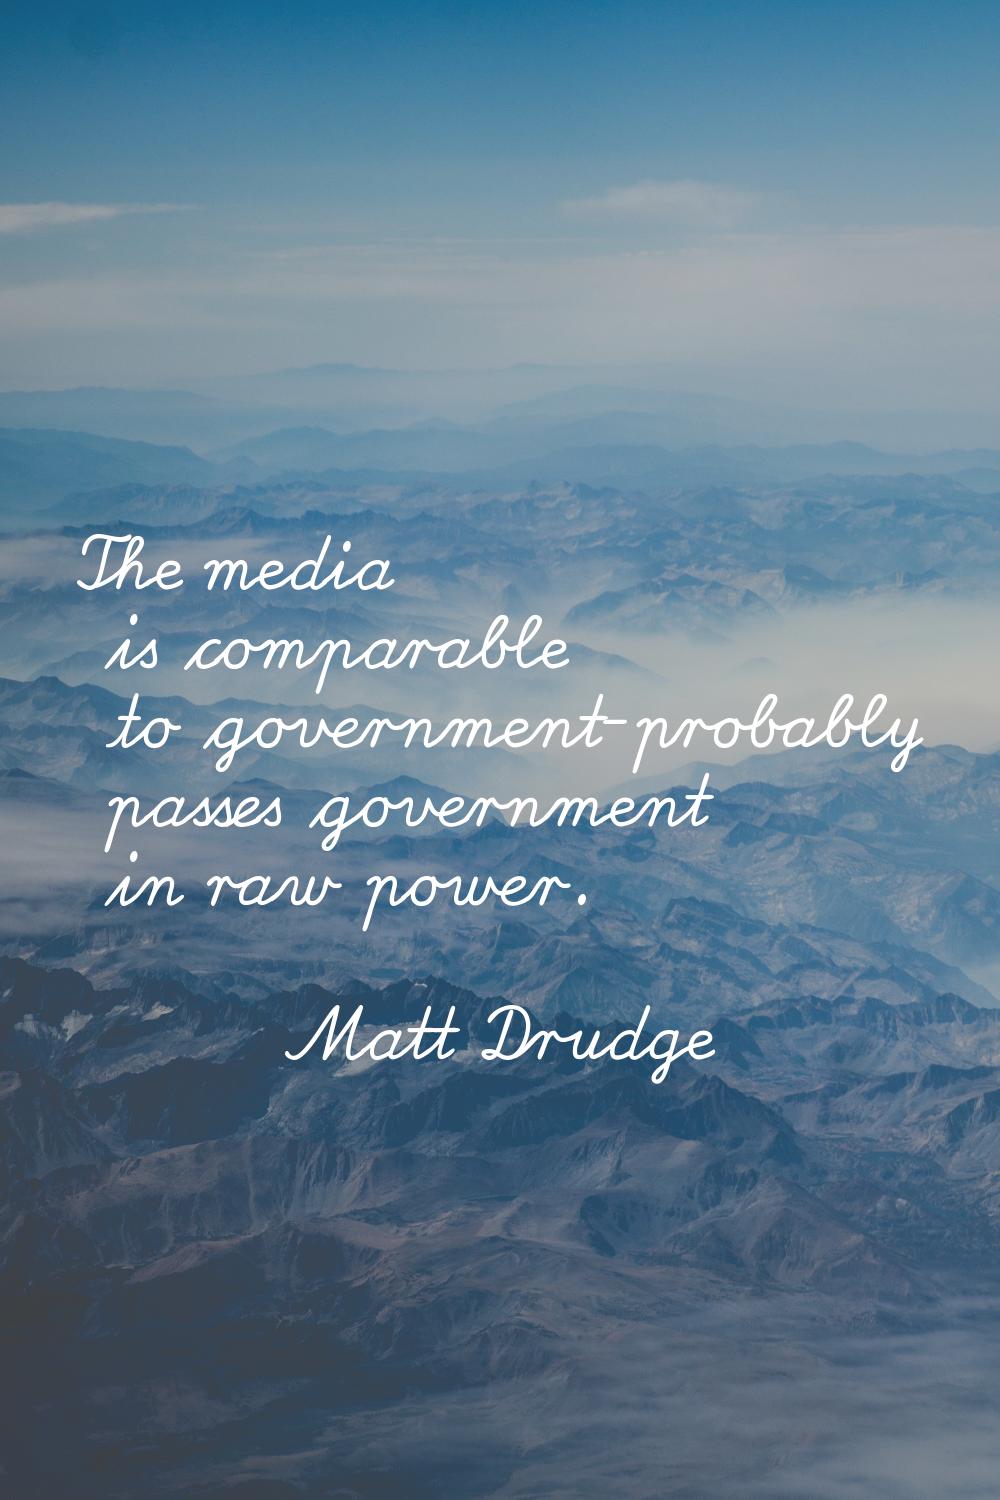 The media is comparable to government-probably passes government in raw power.